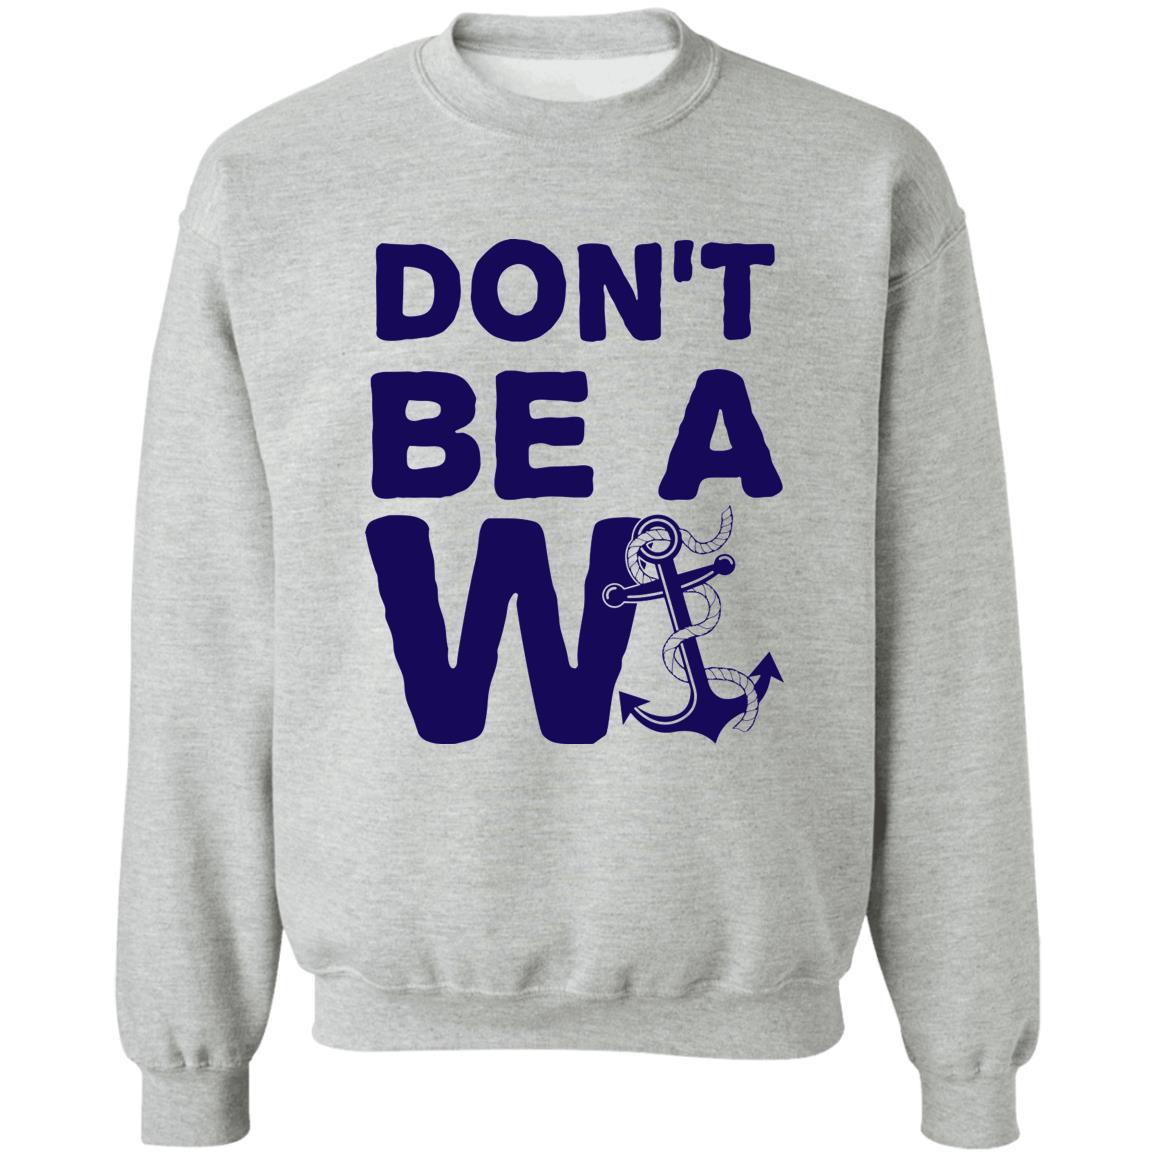 ***2 SIDED***  HRCL FL - Navy Don't Be A Wanker - 2 Sided G180 Crewneck Pullover Sweatshirt